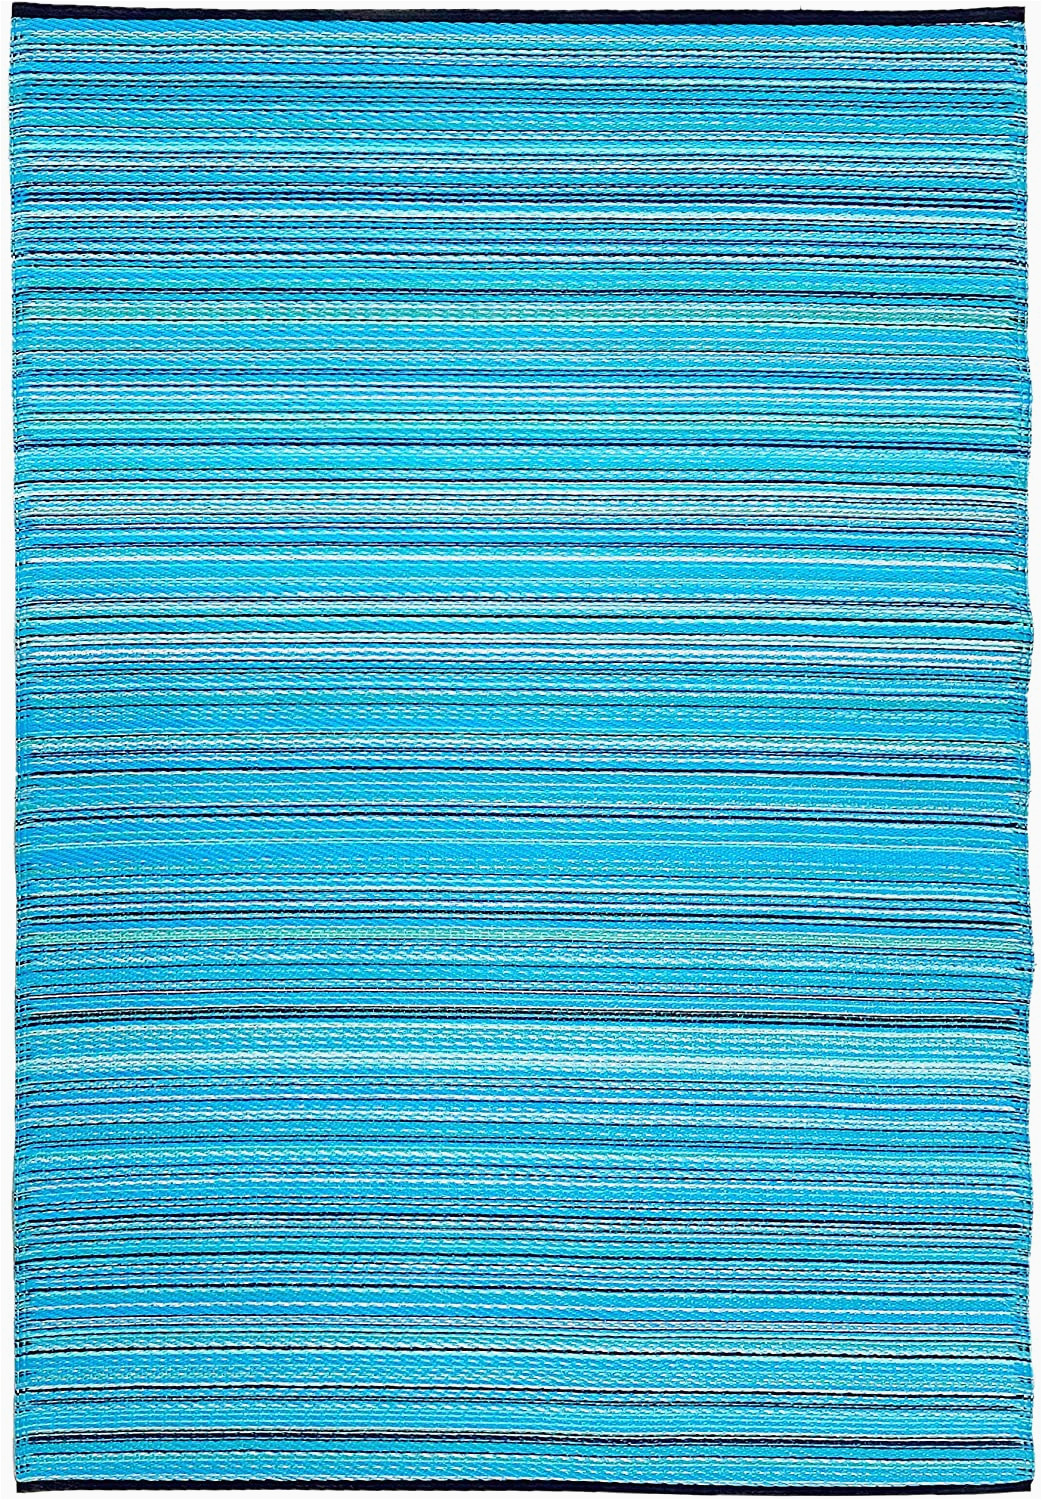 Blue and Green Rug 8 X 10 Green Decore Weaver Premium Grade Stain Proof Reversible Plastic Outdoor Rug 8×10 Turquoise Blue